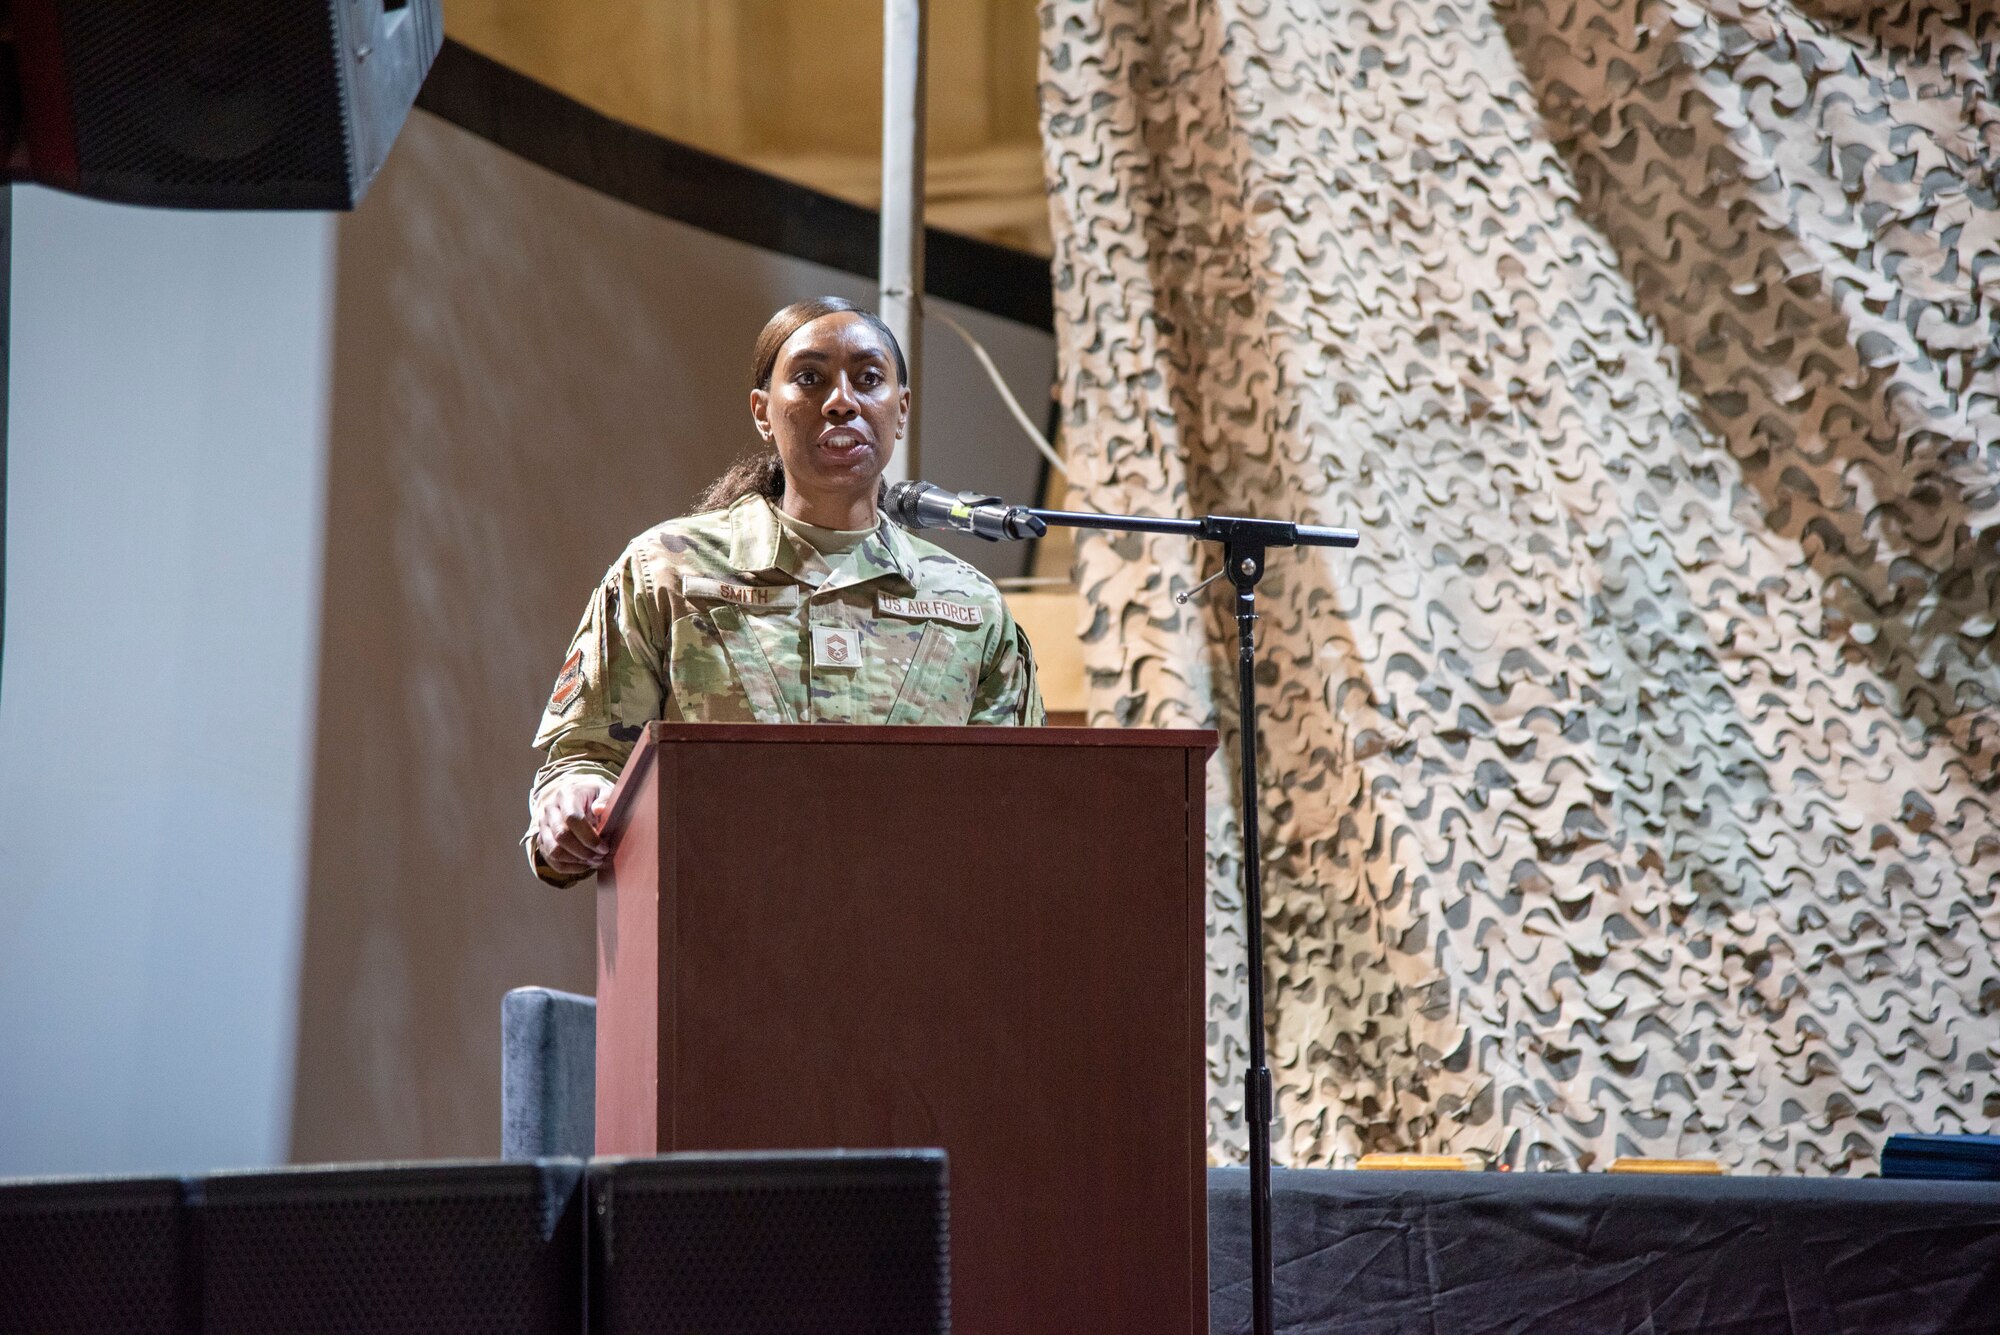 Chief Master Sgt. Keyonna Smith, Logistics and Maintenance Directorate Senior Enlisted Leader, addresses 332d Air Expeditionary Wing Airpower Leadership Academy graduates at an undisclosed location, Southwest Asia, Dec. 22, 2022. ALA is an initiative to enrich the lives of Airmen with education on leadership and quality-of-life issues. (U.S. Air Force photo by: Tech. Sgt. Jim Bentley)